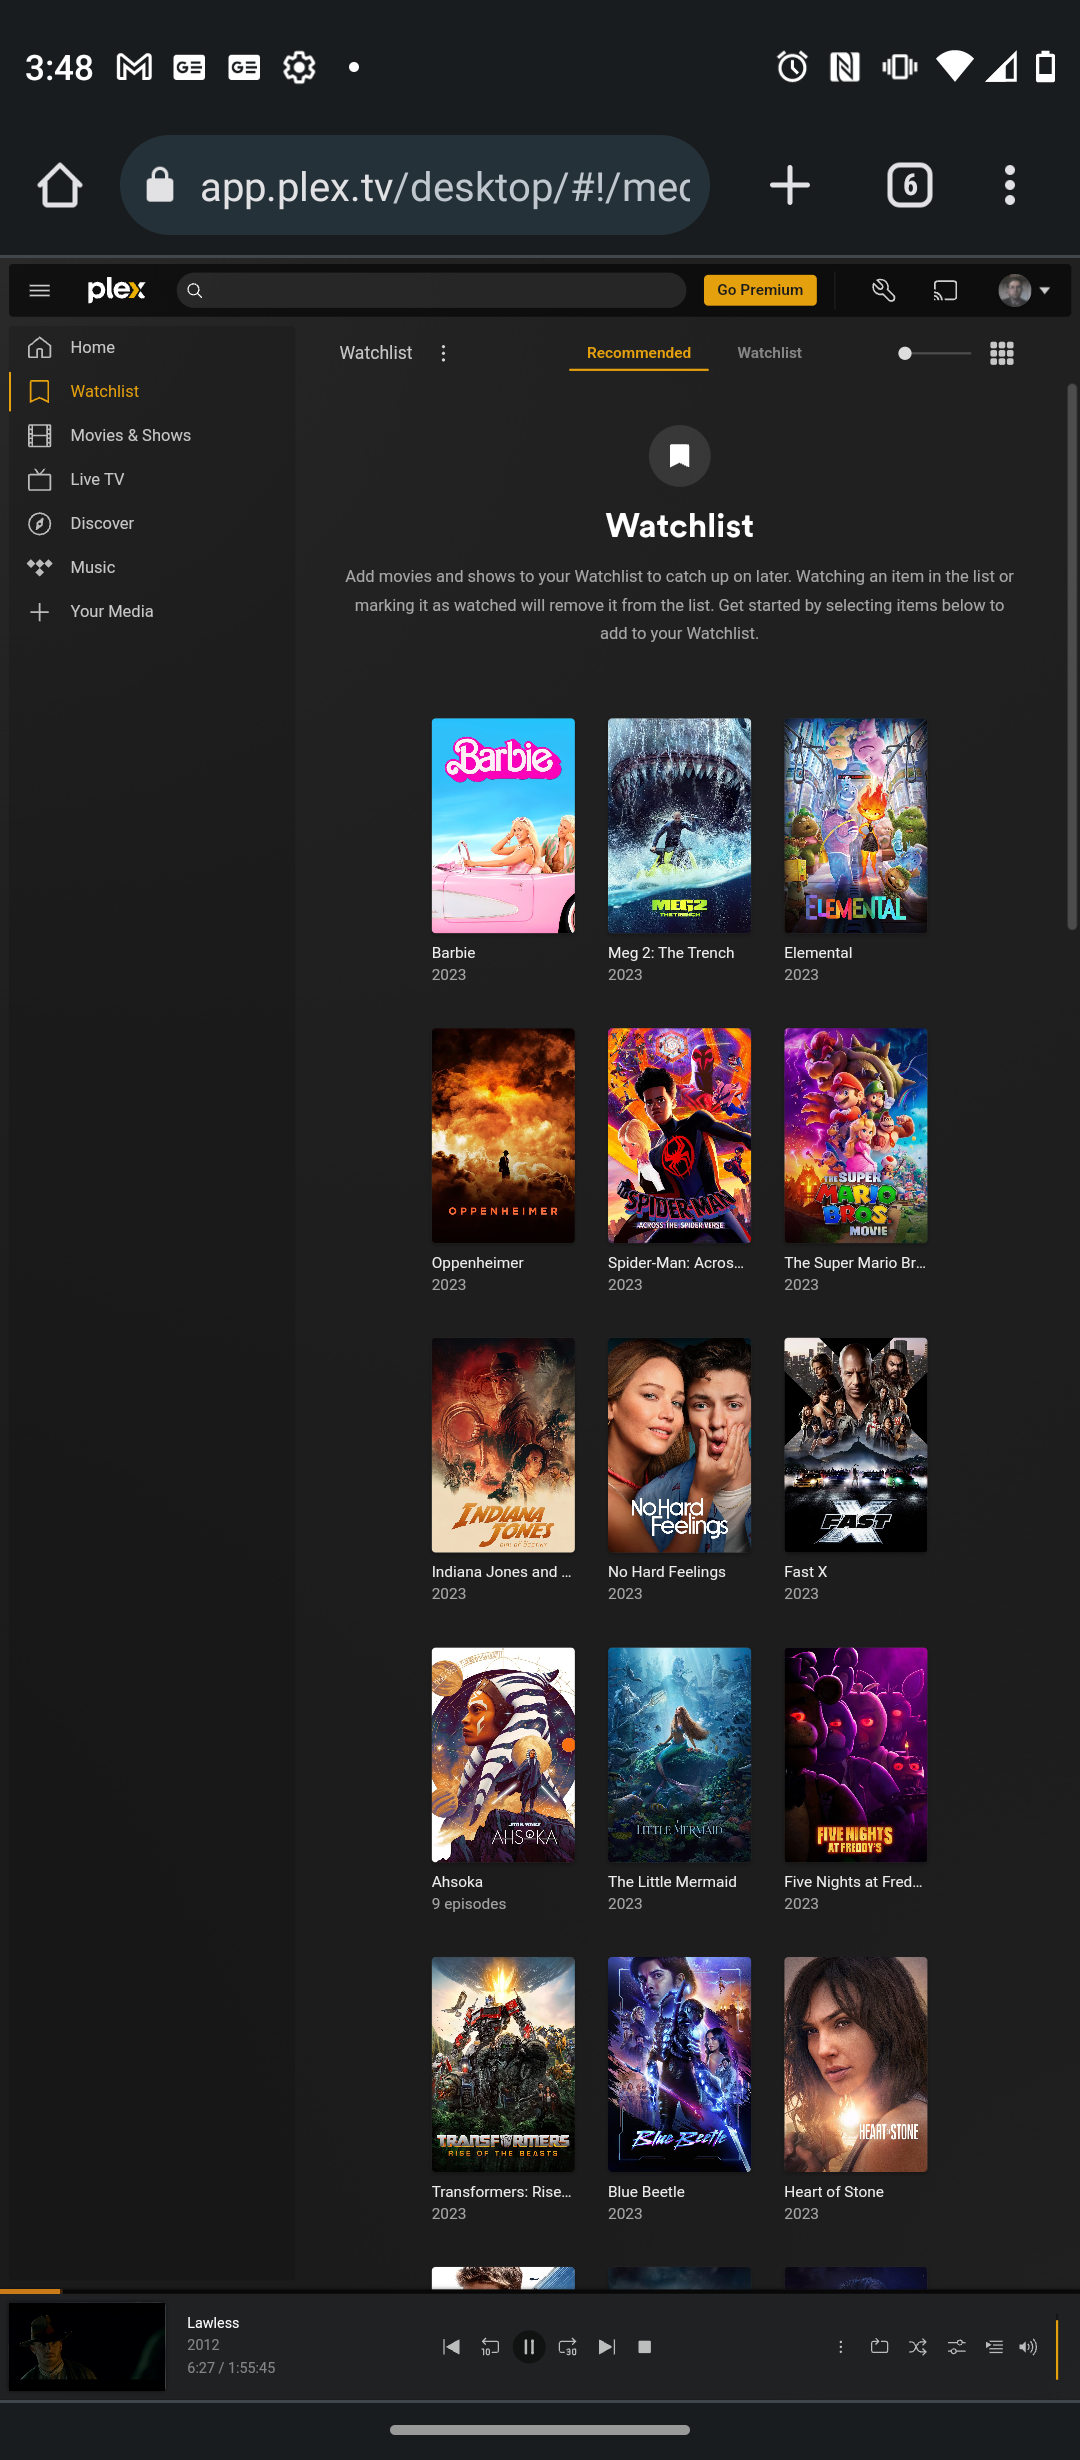 Streaming Plex content viewed on a mobile device browser.